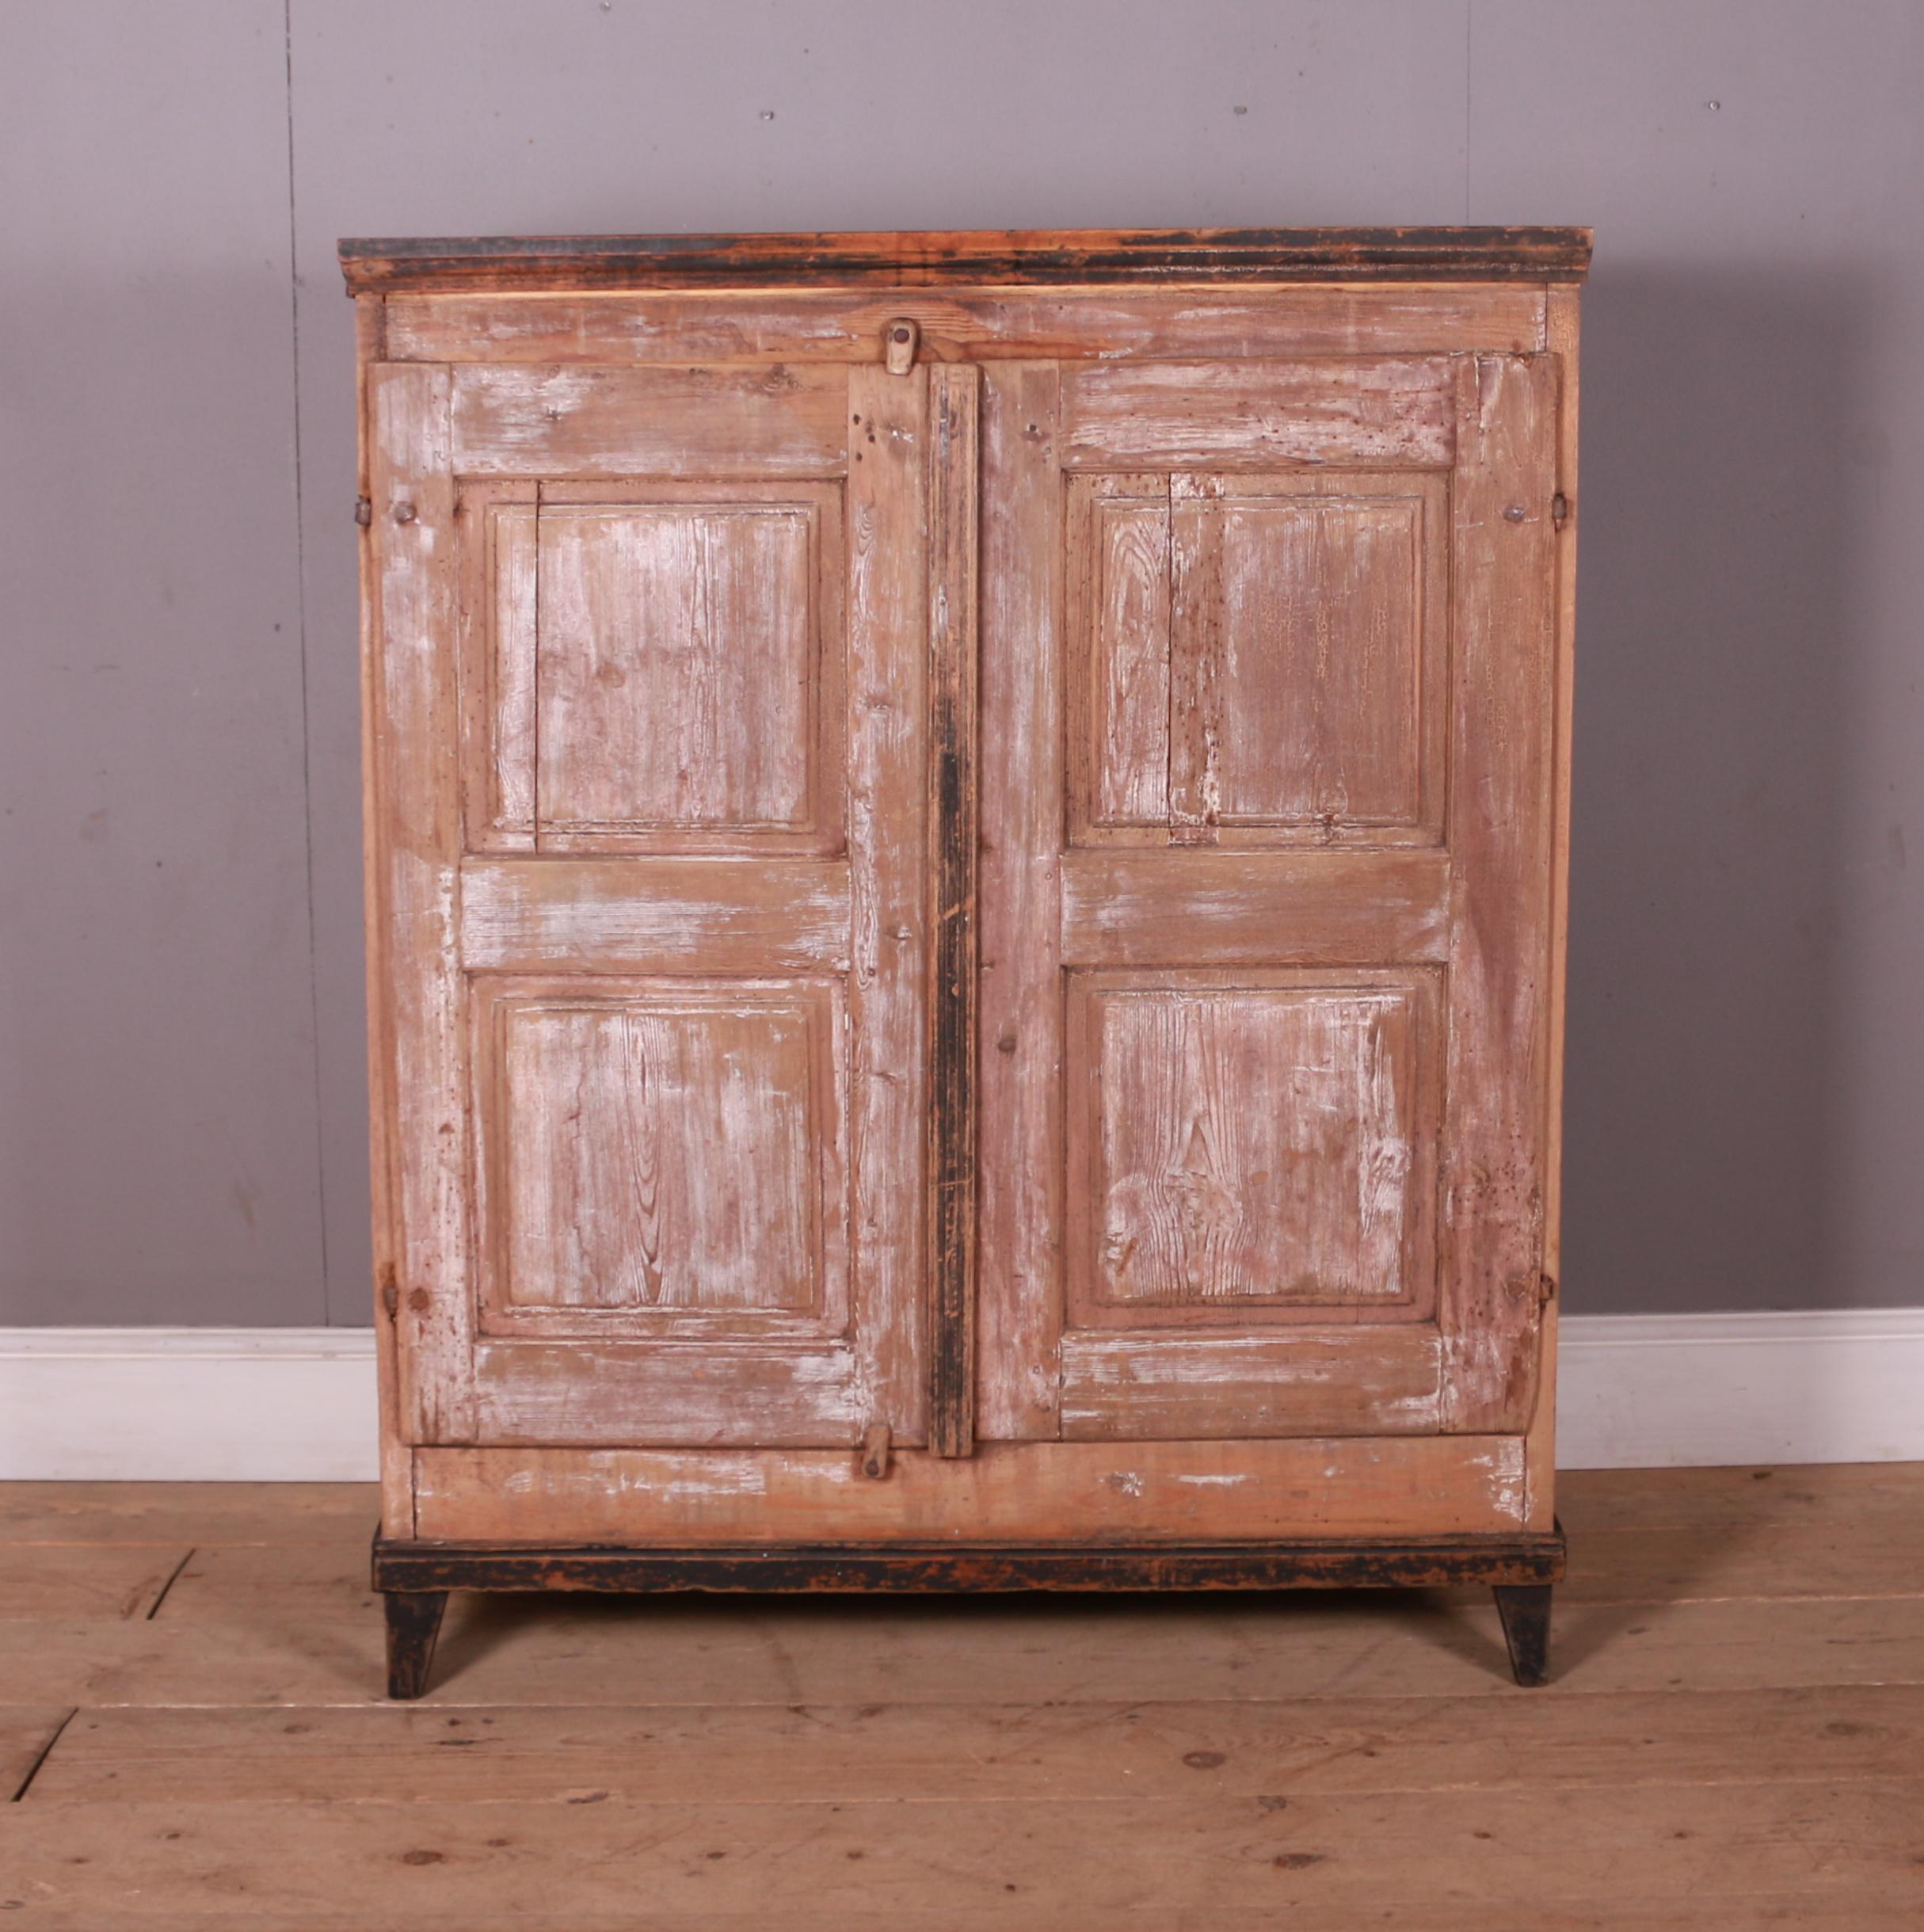 Unusual 19th C Swedish pine jam cupboard with remains of original paint. 1830.

Reference: 7366

Dimensions
42.5 inches (108 cms) Wide
16.5 inches (42 cms) Deep
52 inches (132 cms) High.